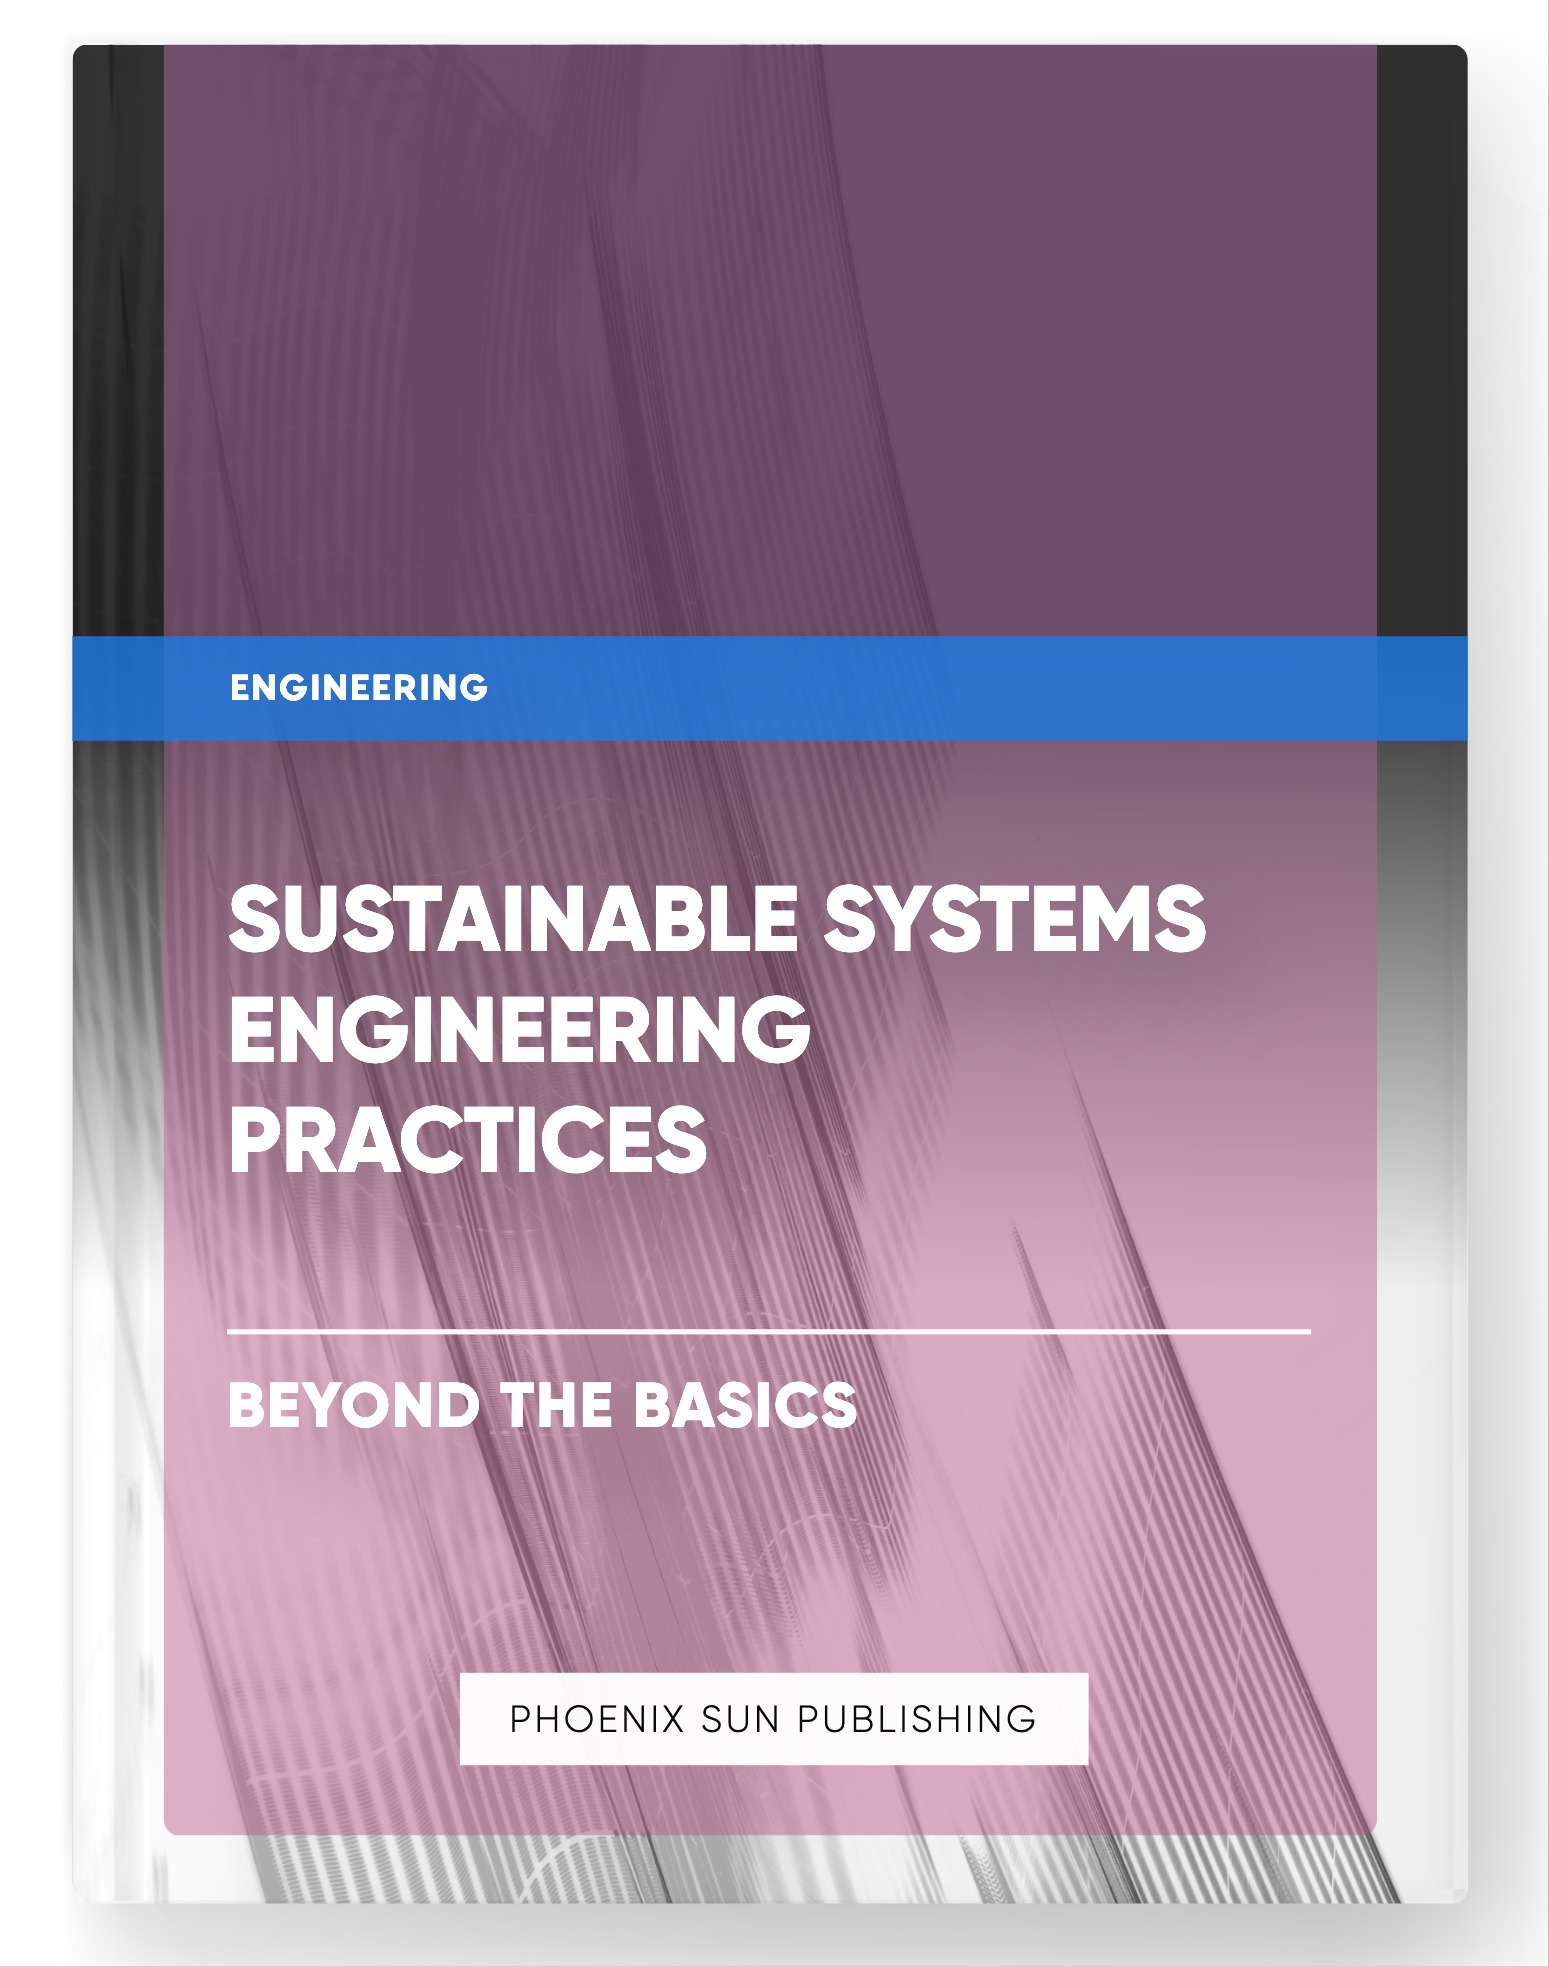 Sustainable Systems Engineering Practices – Beyond the Basics